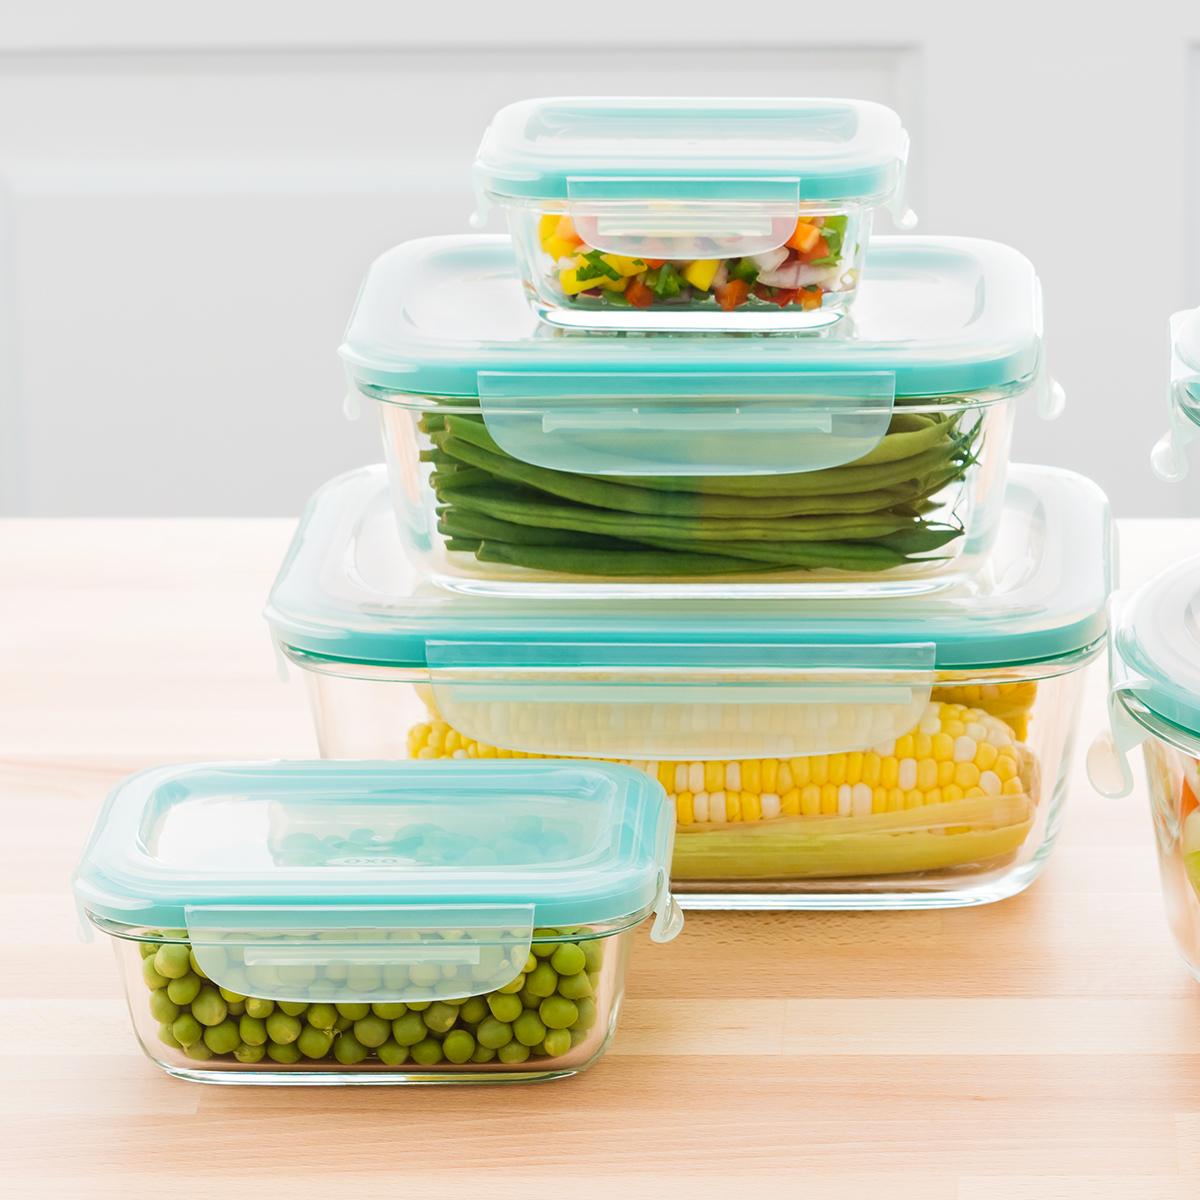 https://www.containerstore.com/catalogimages/324118/OXO-Food-Storage.jpg